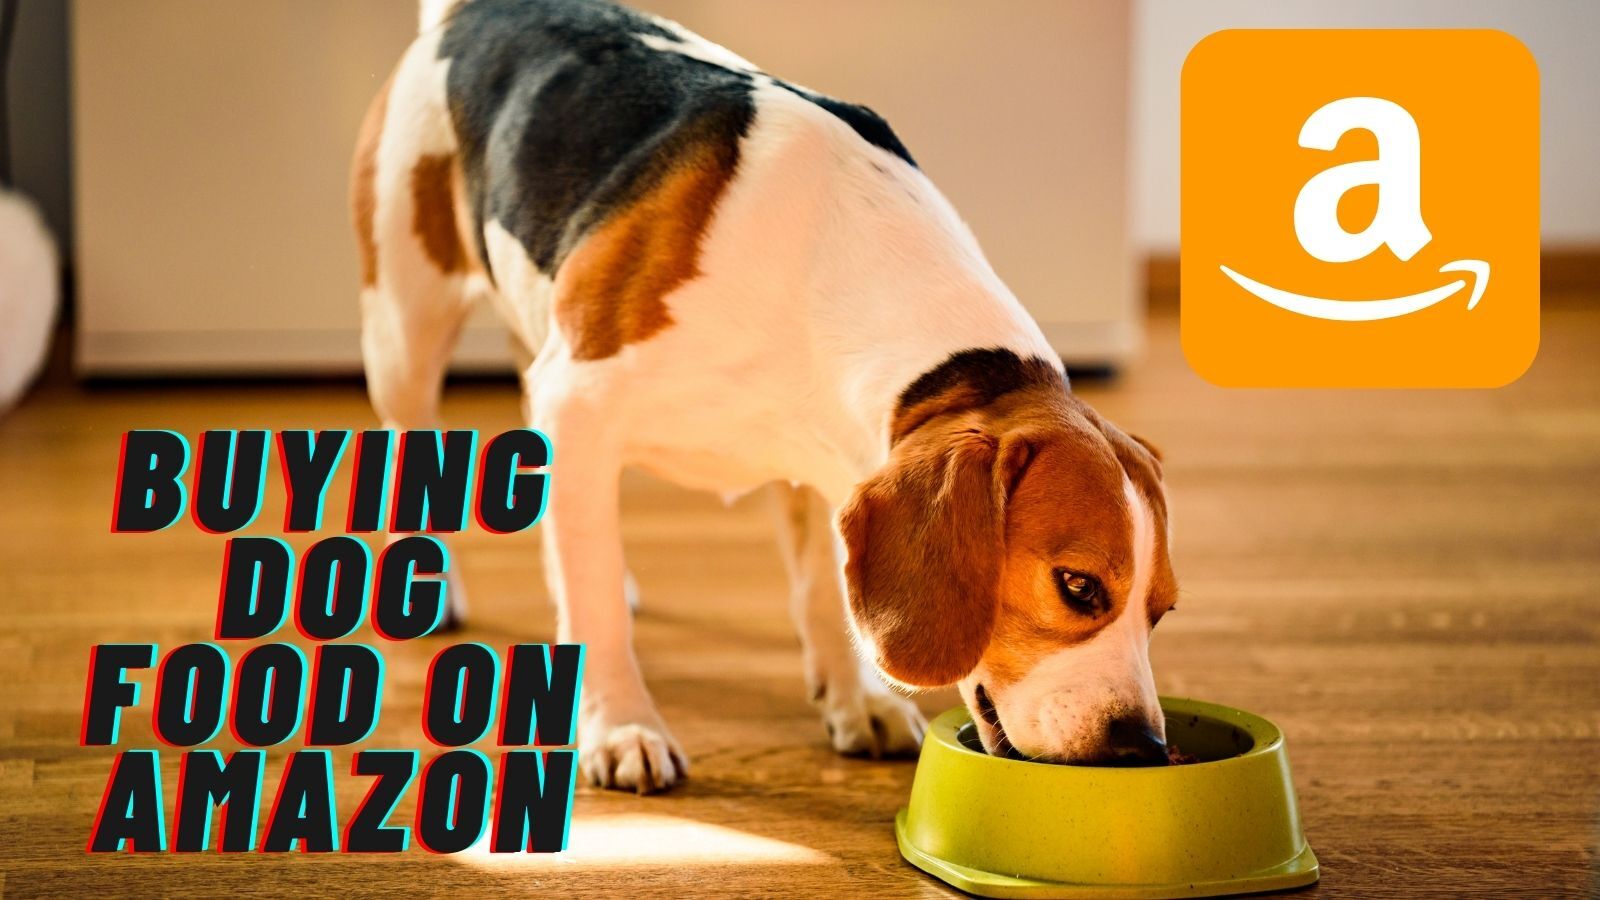 Buying Dog Food On Amazon - Can You Trust It?